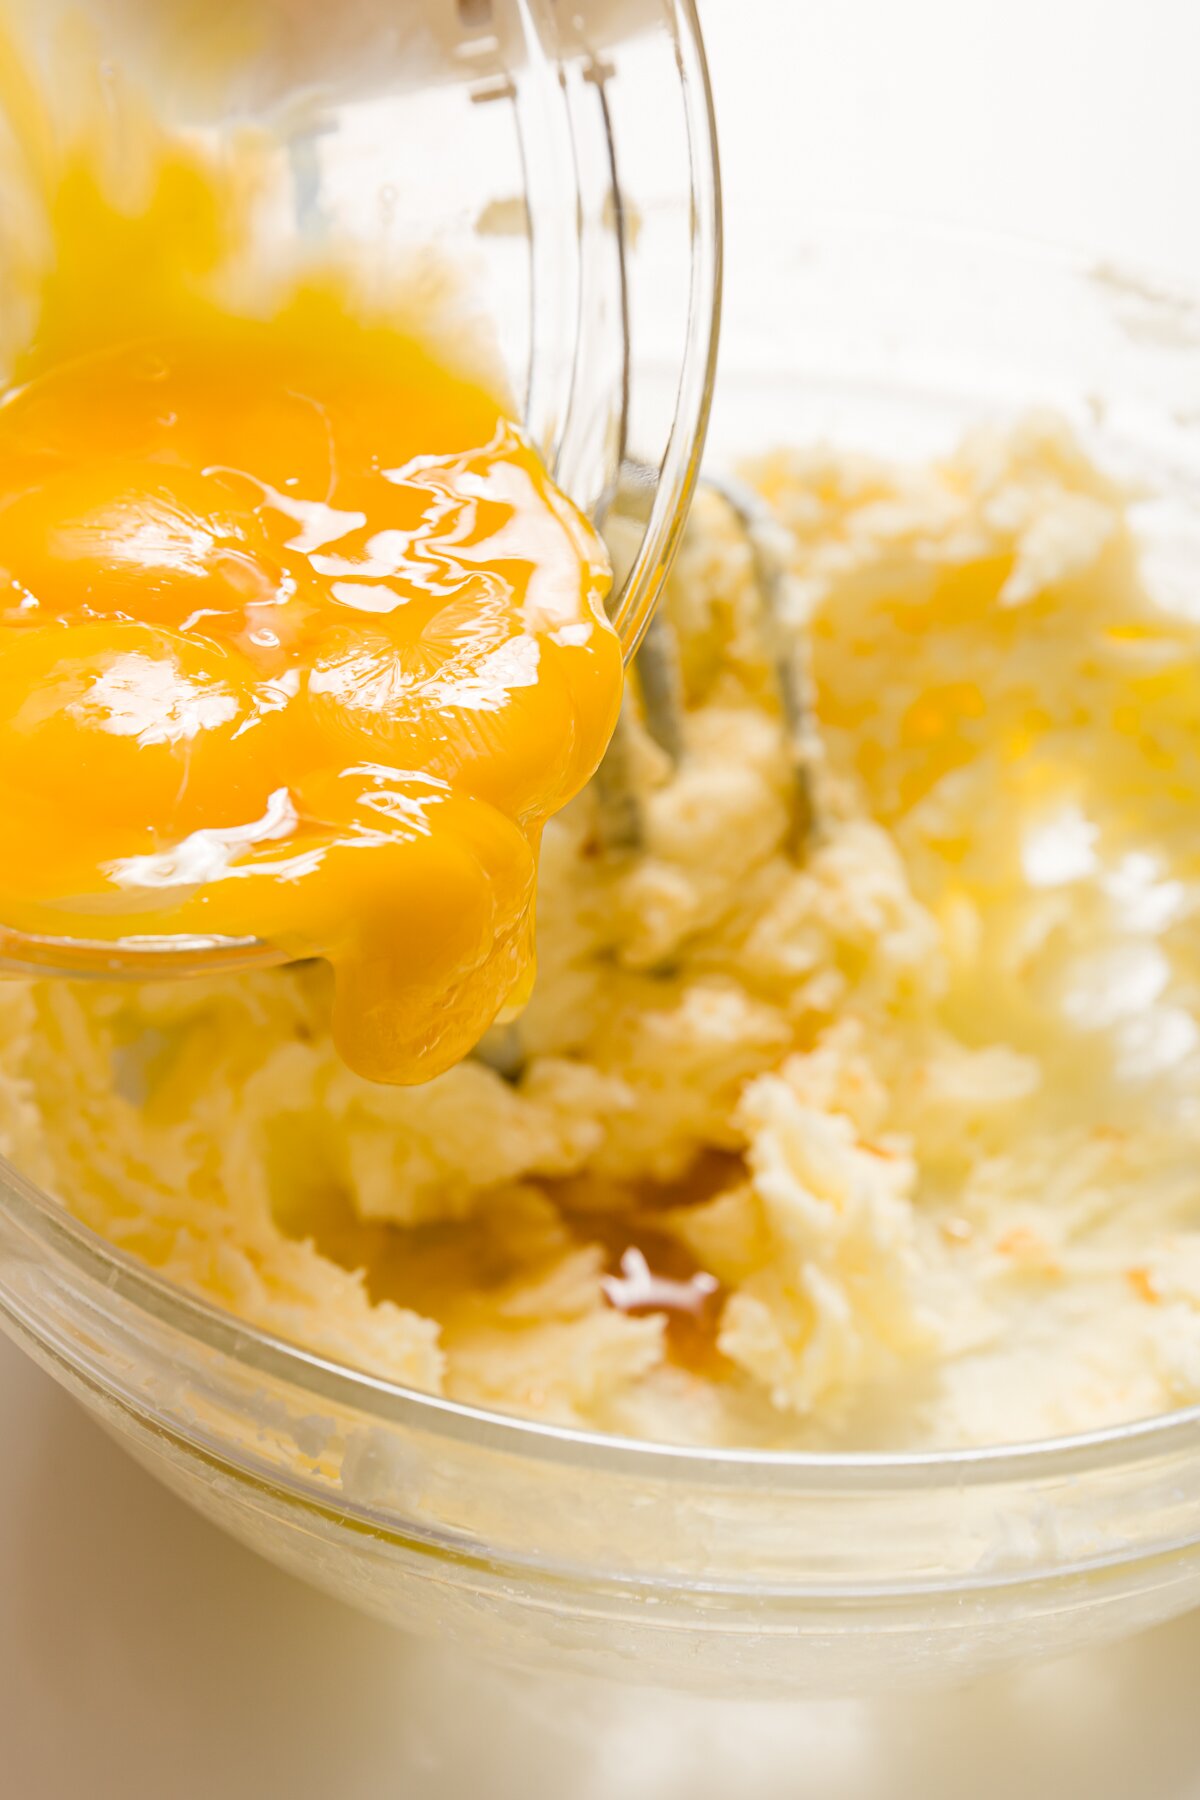 Adding egg yolks to batter in a glass bowl